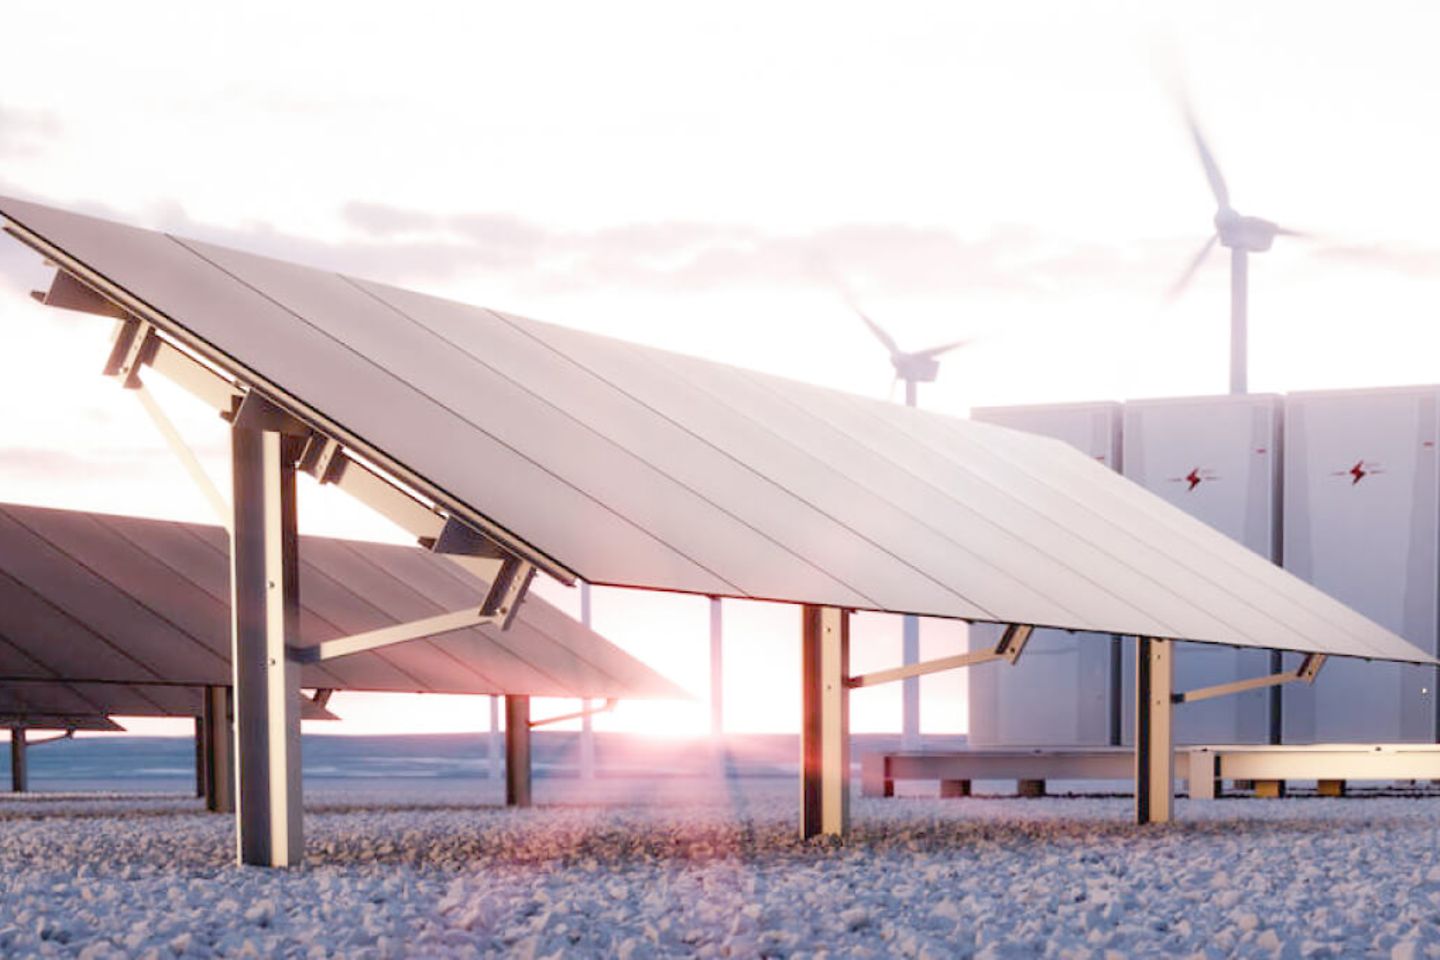 Solar panels, a modular battery energy storage system, and a wind turbine system